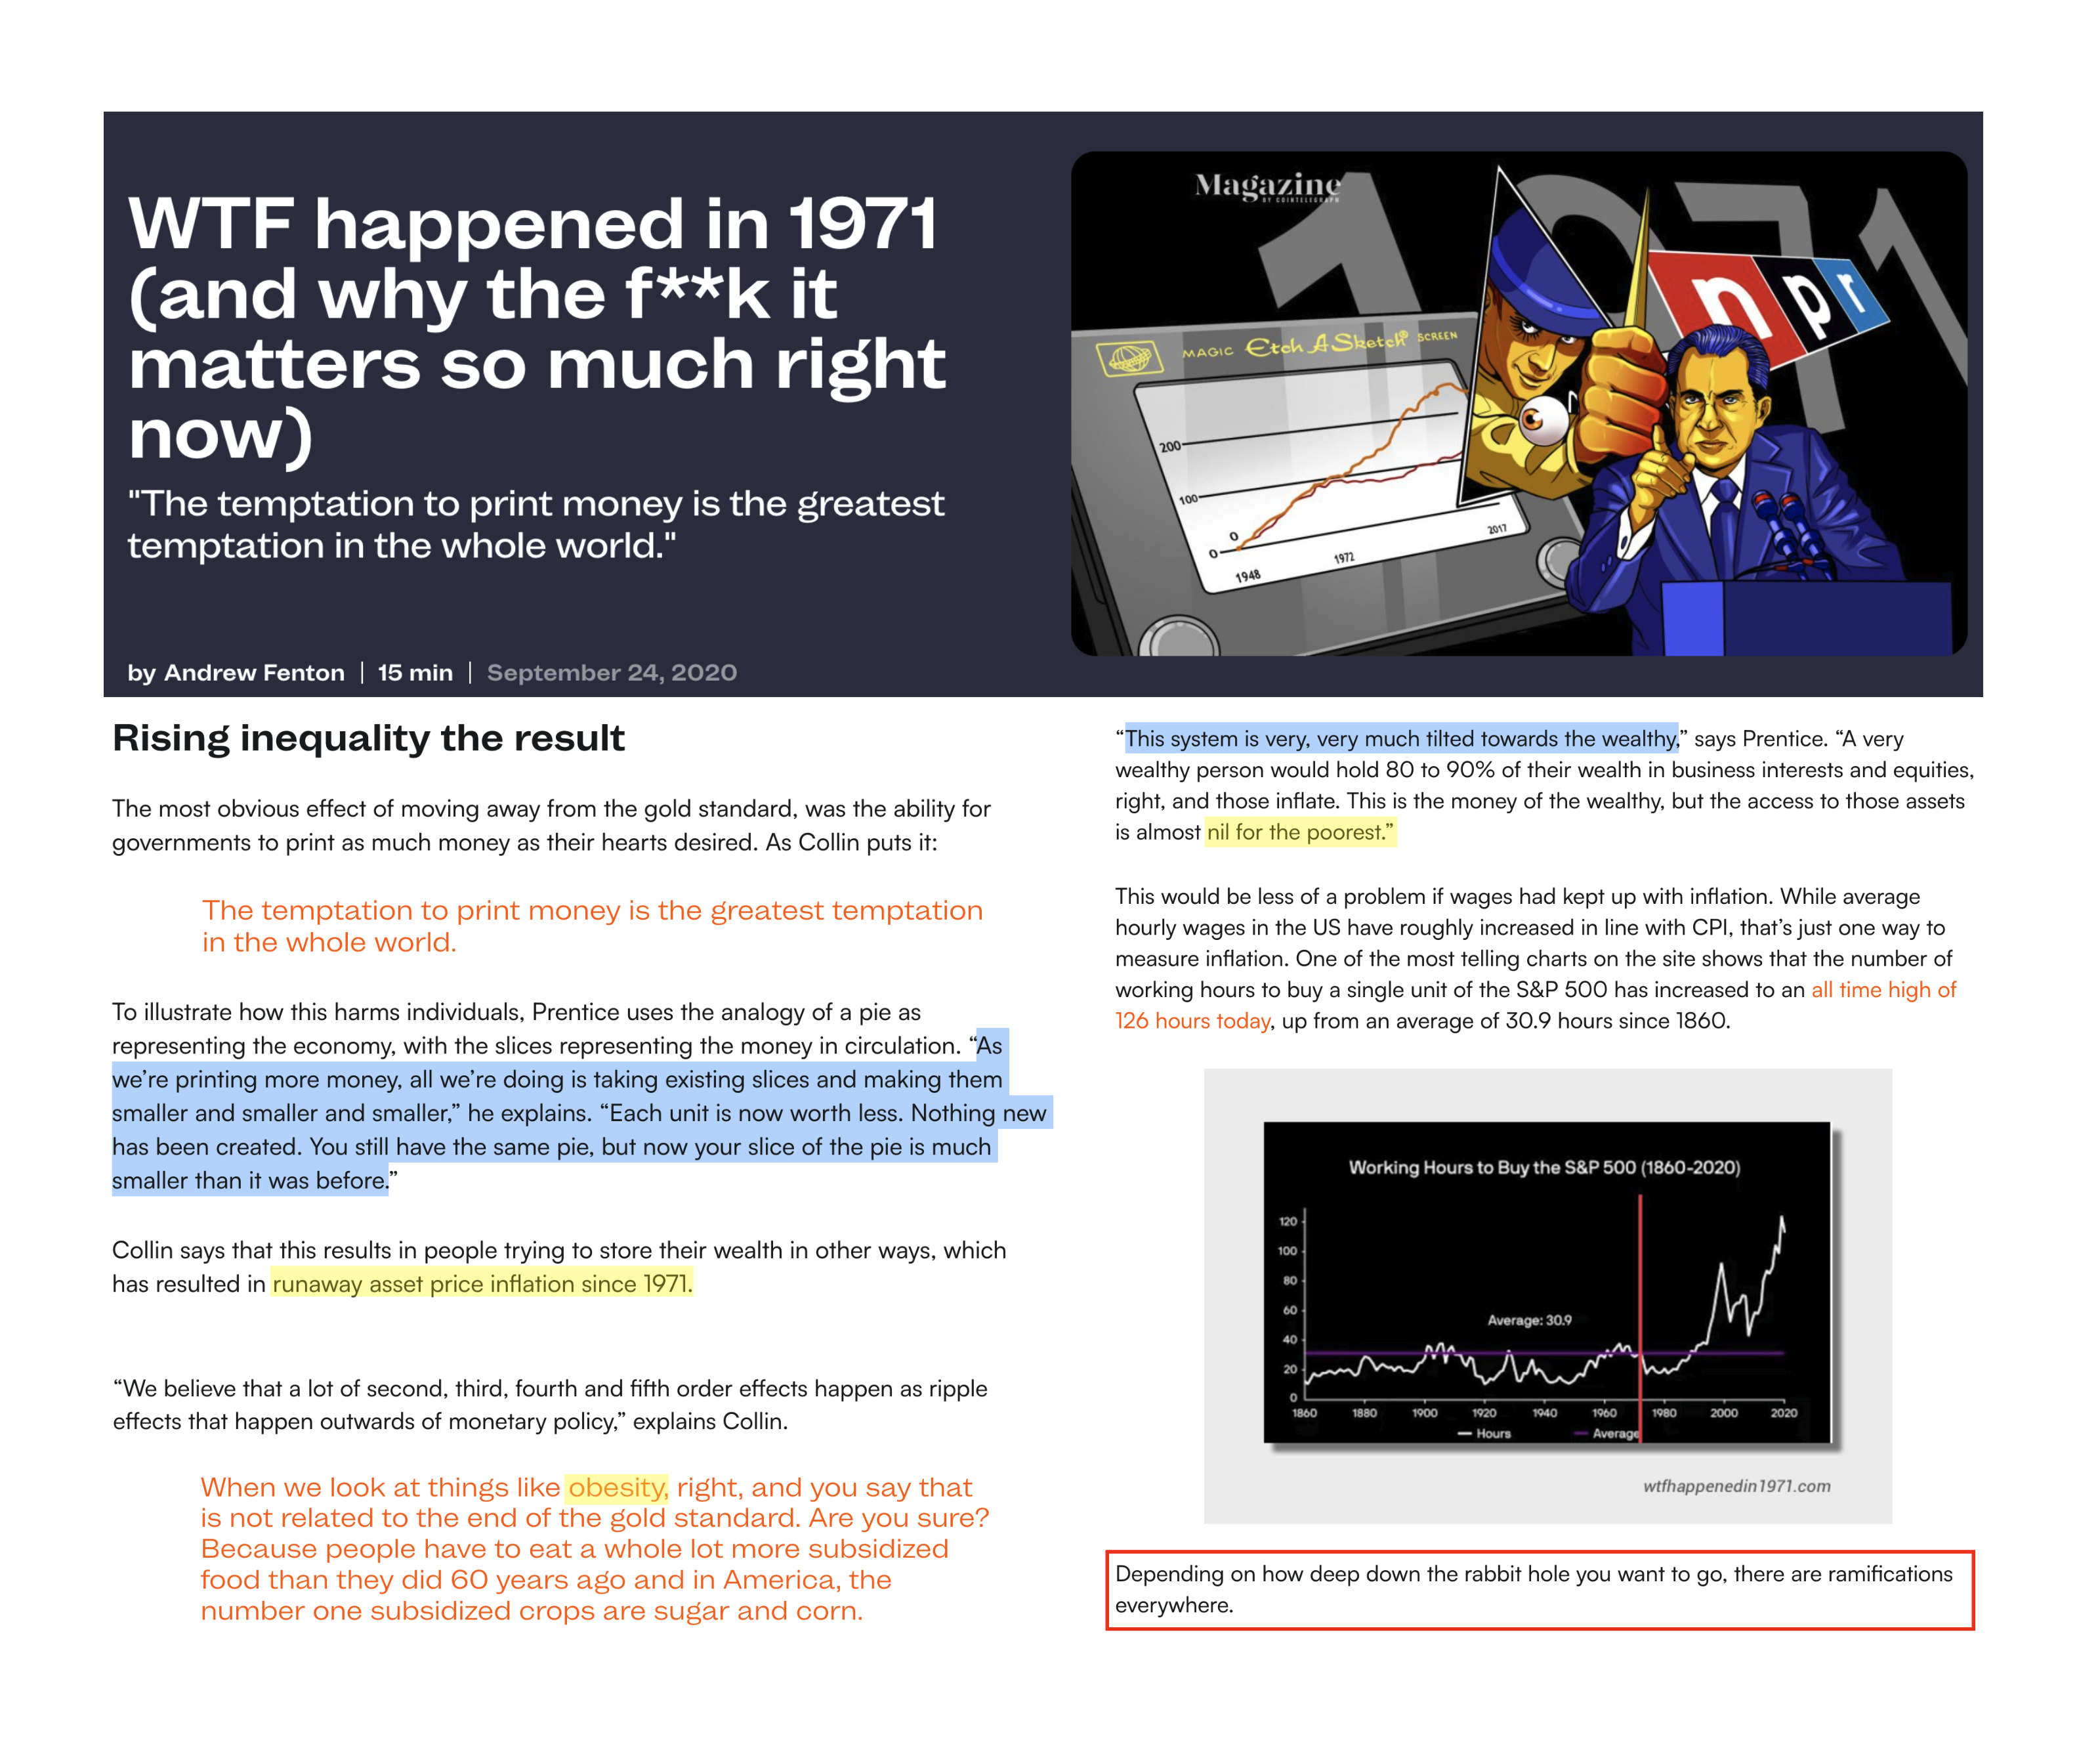 https://cointelegraph.com/magazine/wtf-happened-in-1971/